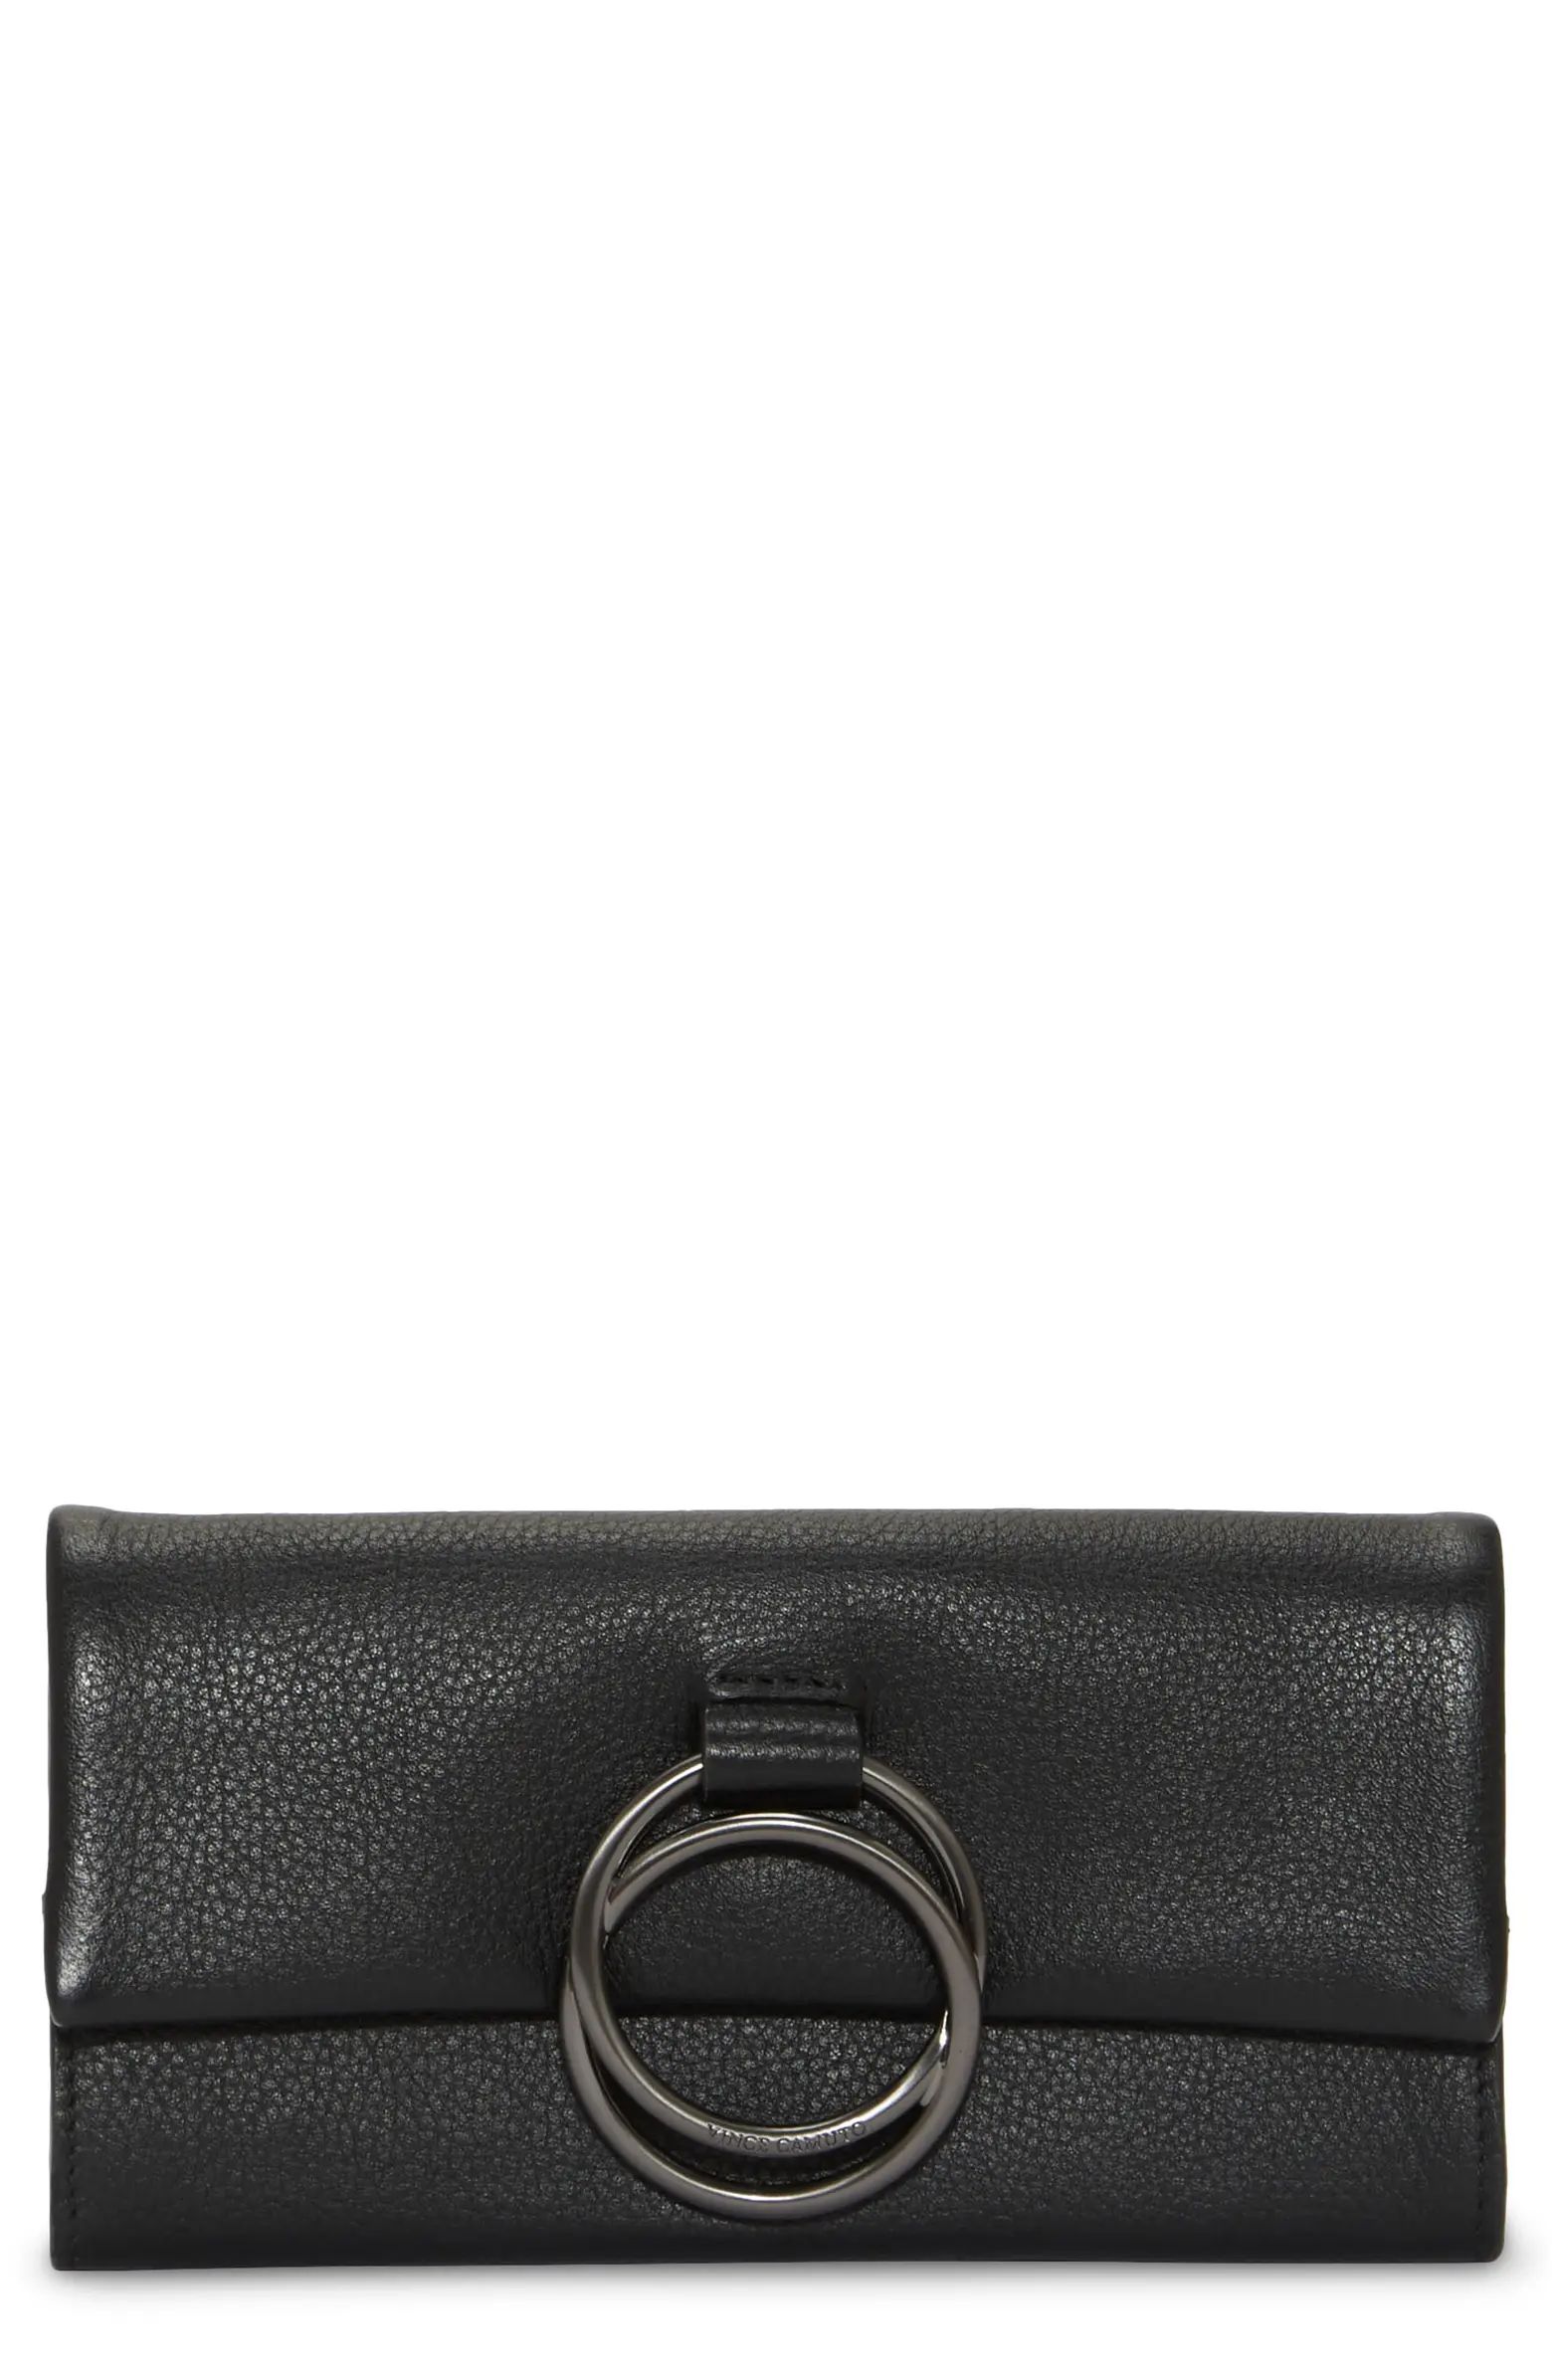 Livy Leather Clutch Wallet | Nordstrom